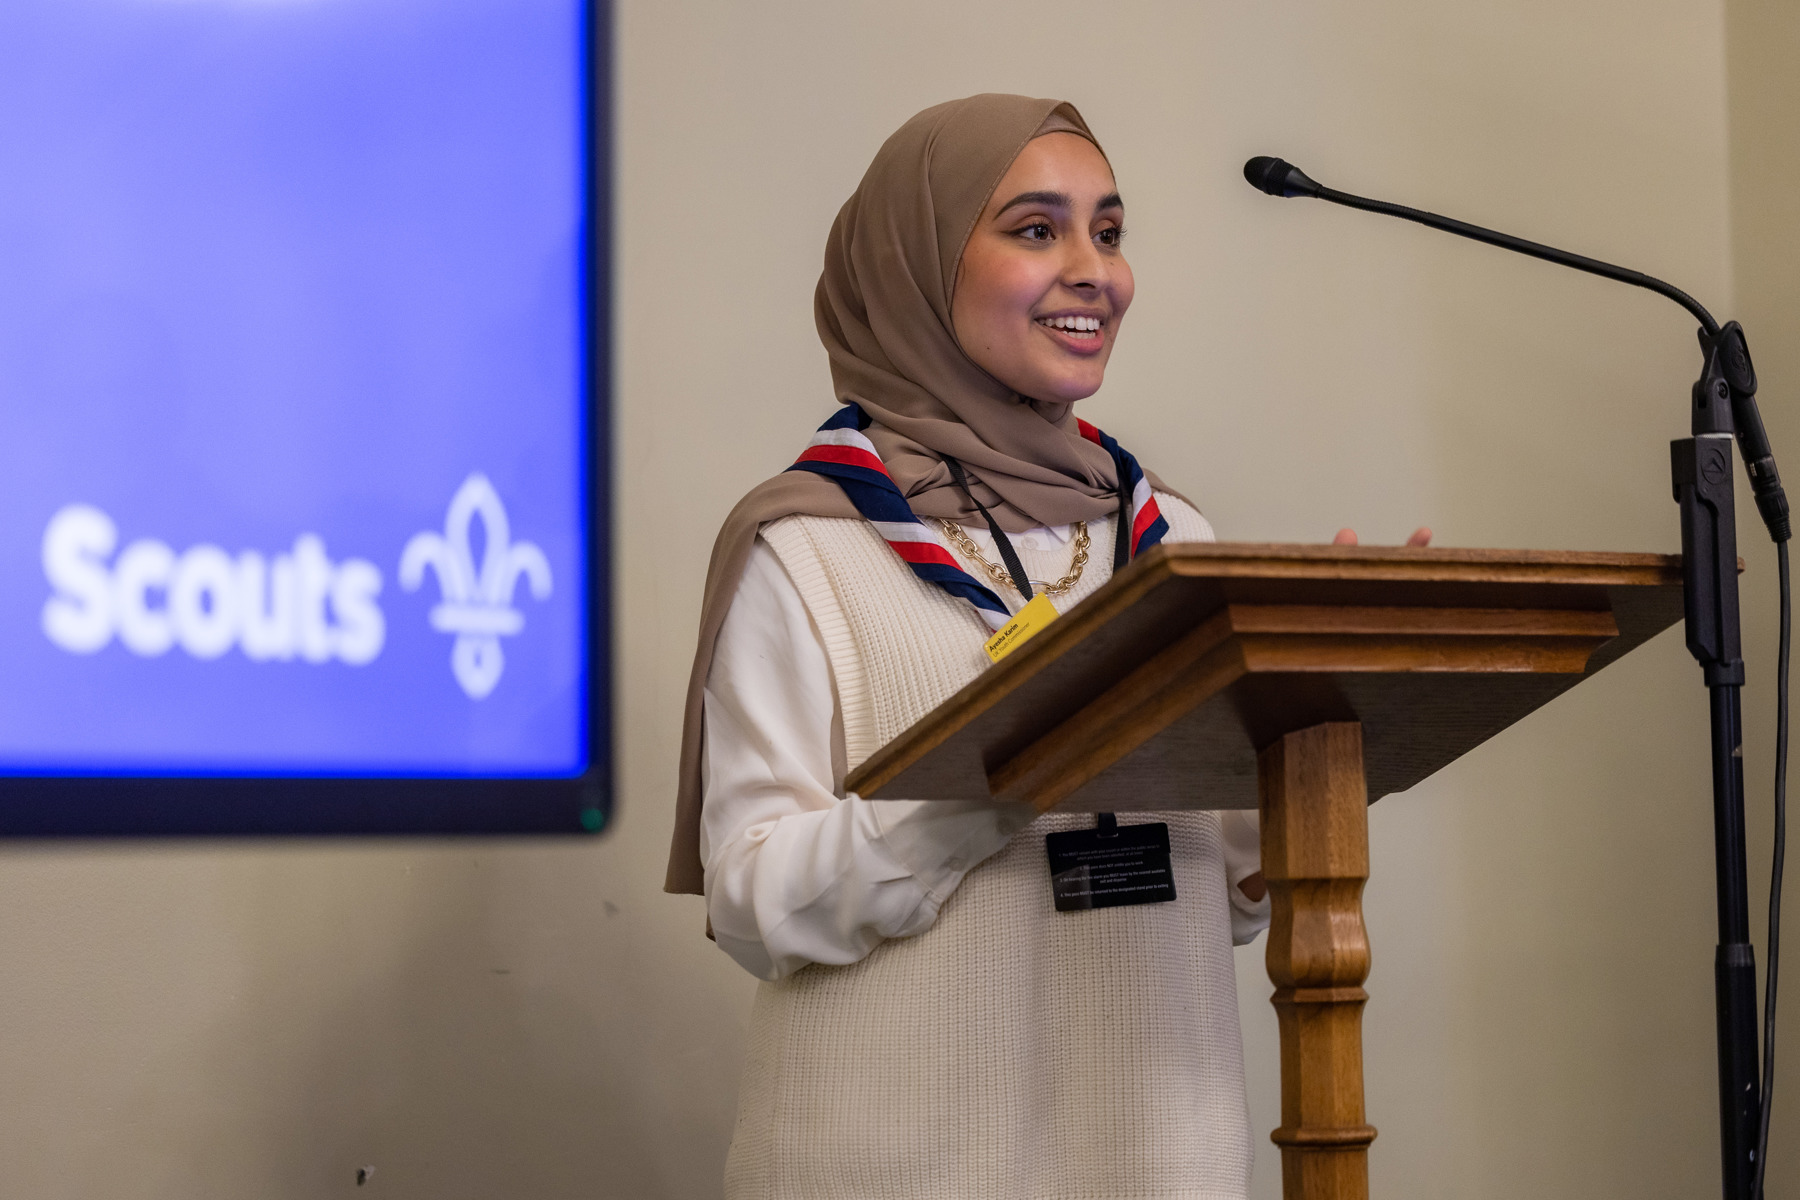 UK Youth Commissioner Ayesha Karim is standing up to speak in Parliament. She's wearing a red white and navy necker and stands in front of a microphone. Behind her is a purple screen with a white Scouts logo on.